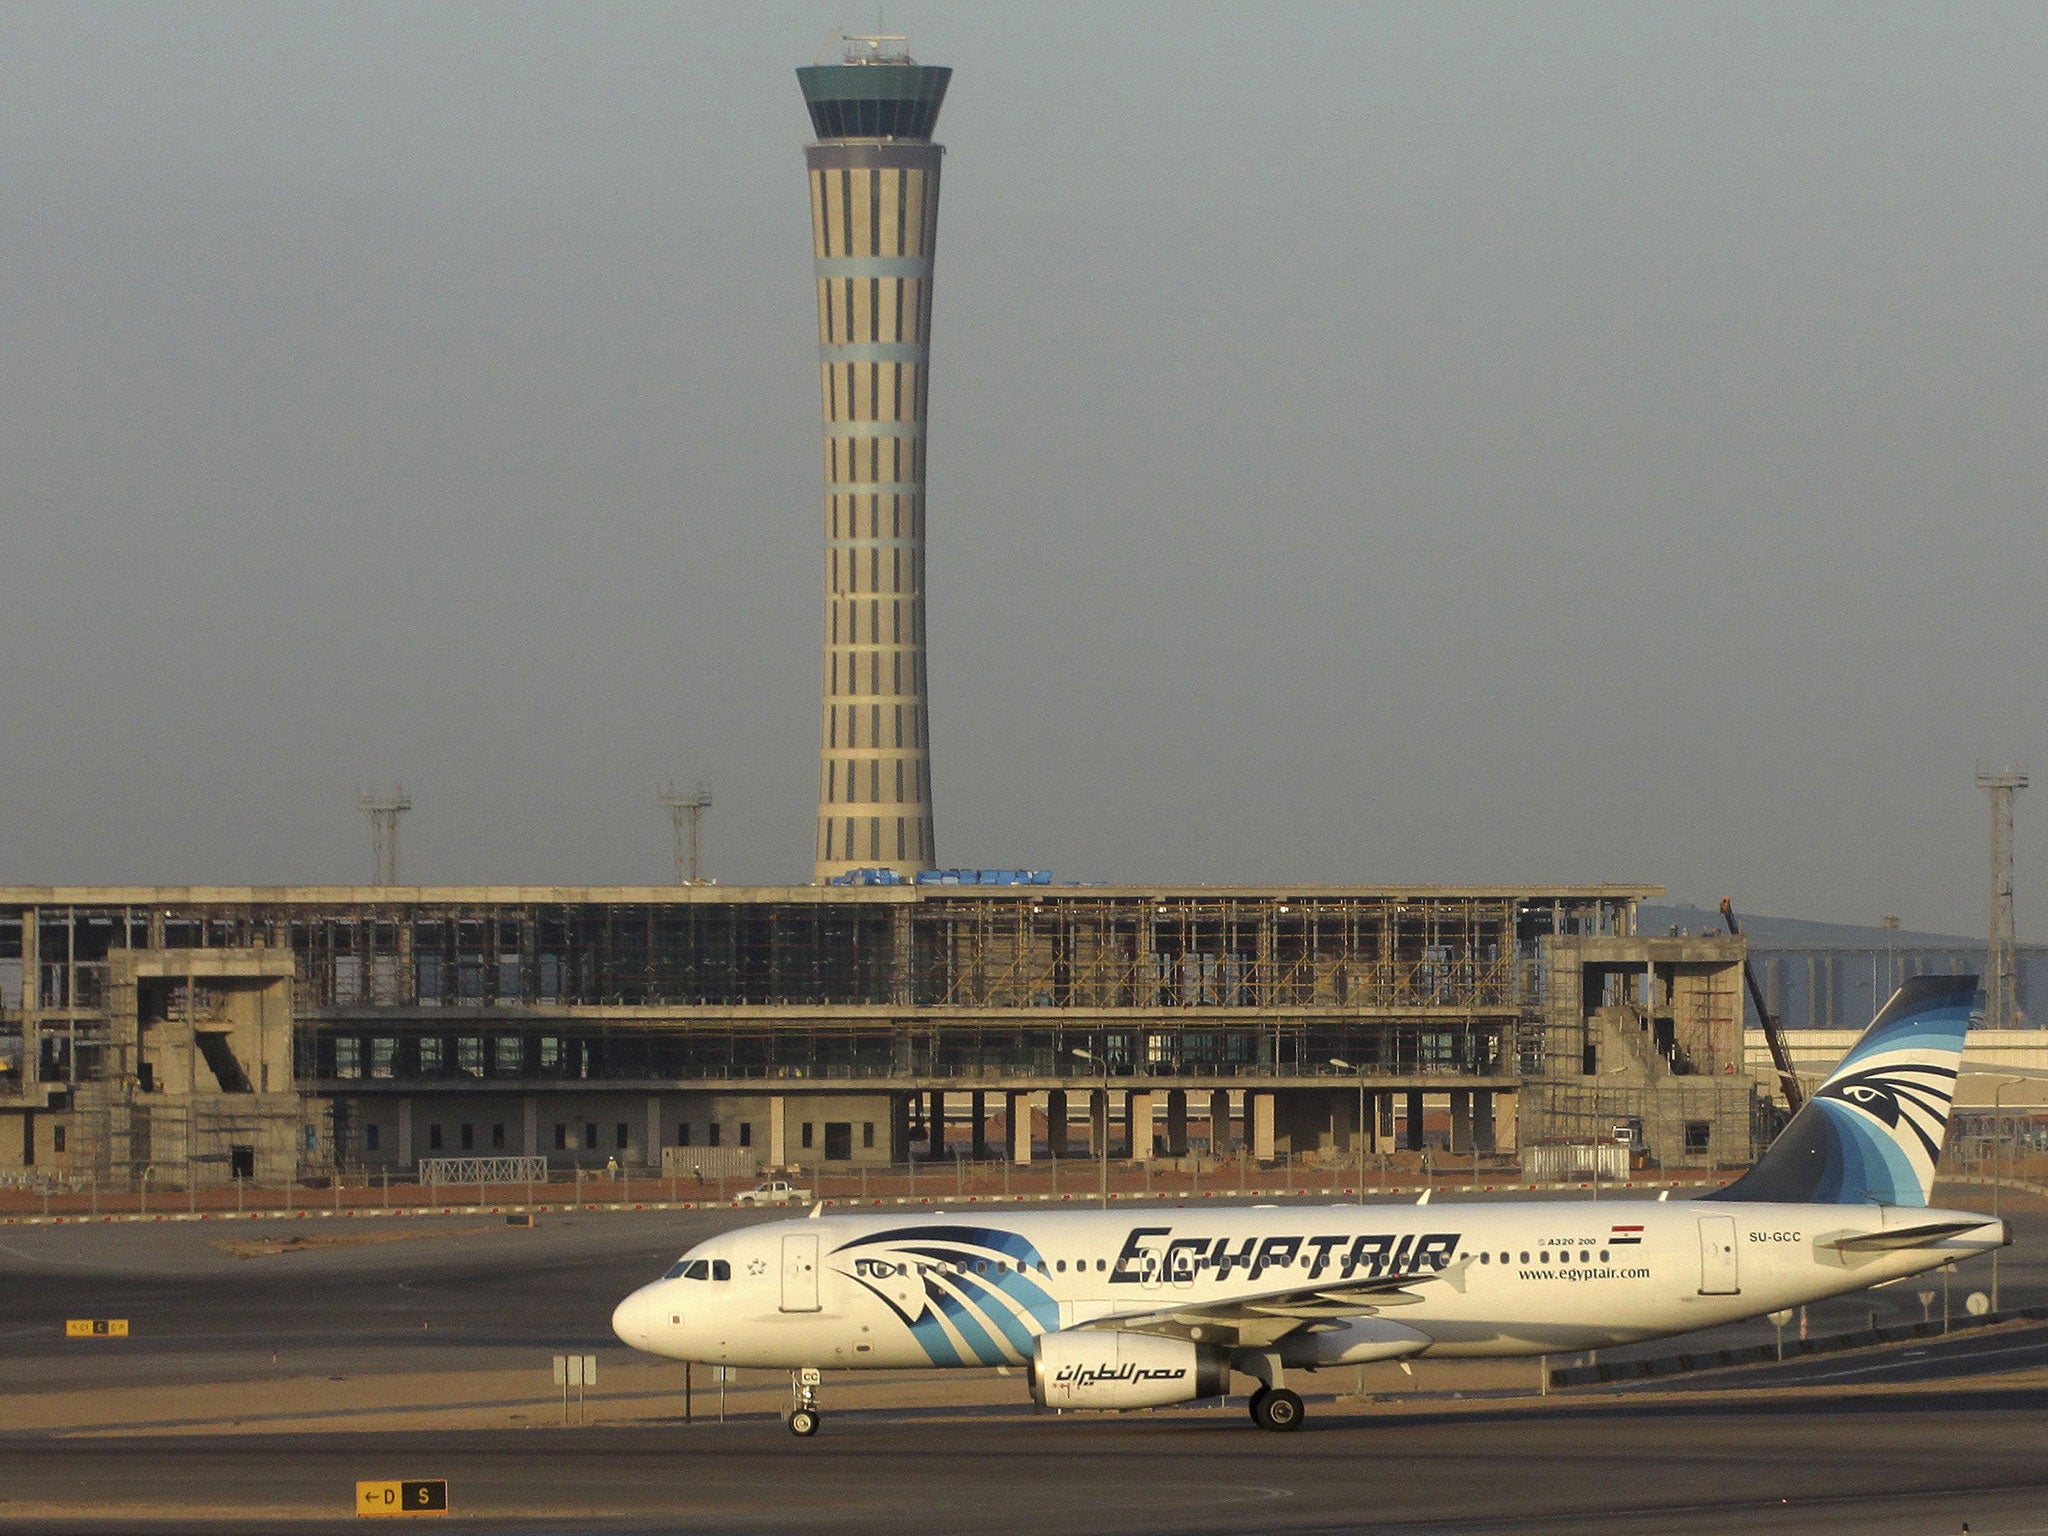 An EgyptAir Airbus A320 with the registration SU-GCC - the same as the missing jet - sits on the tarmac at Cairo airport, in file image from 10 December 2014